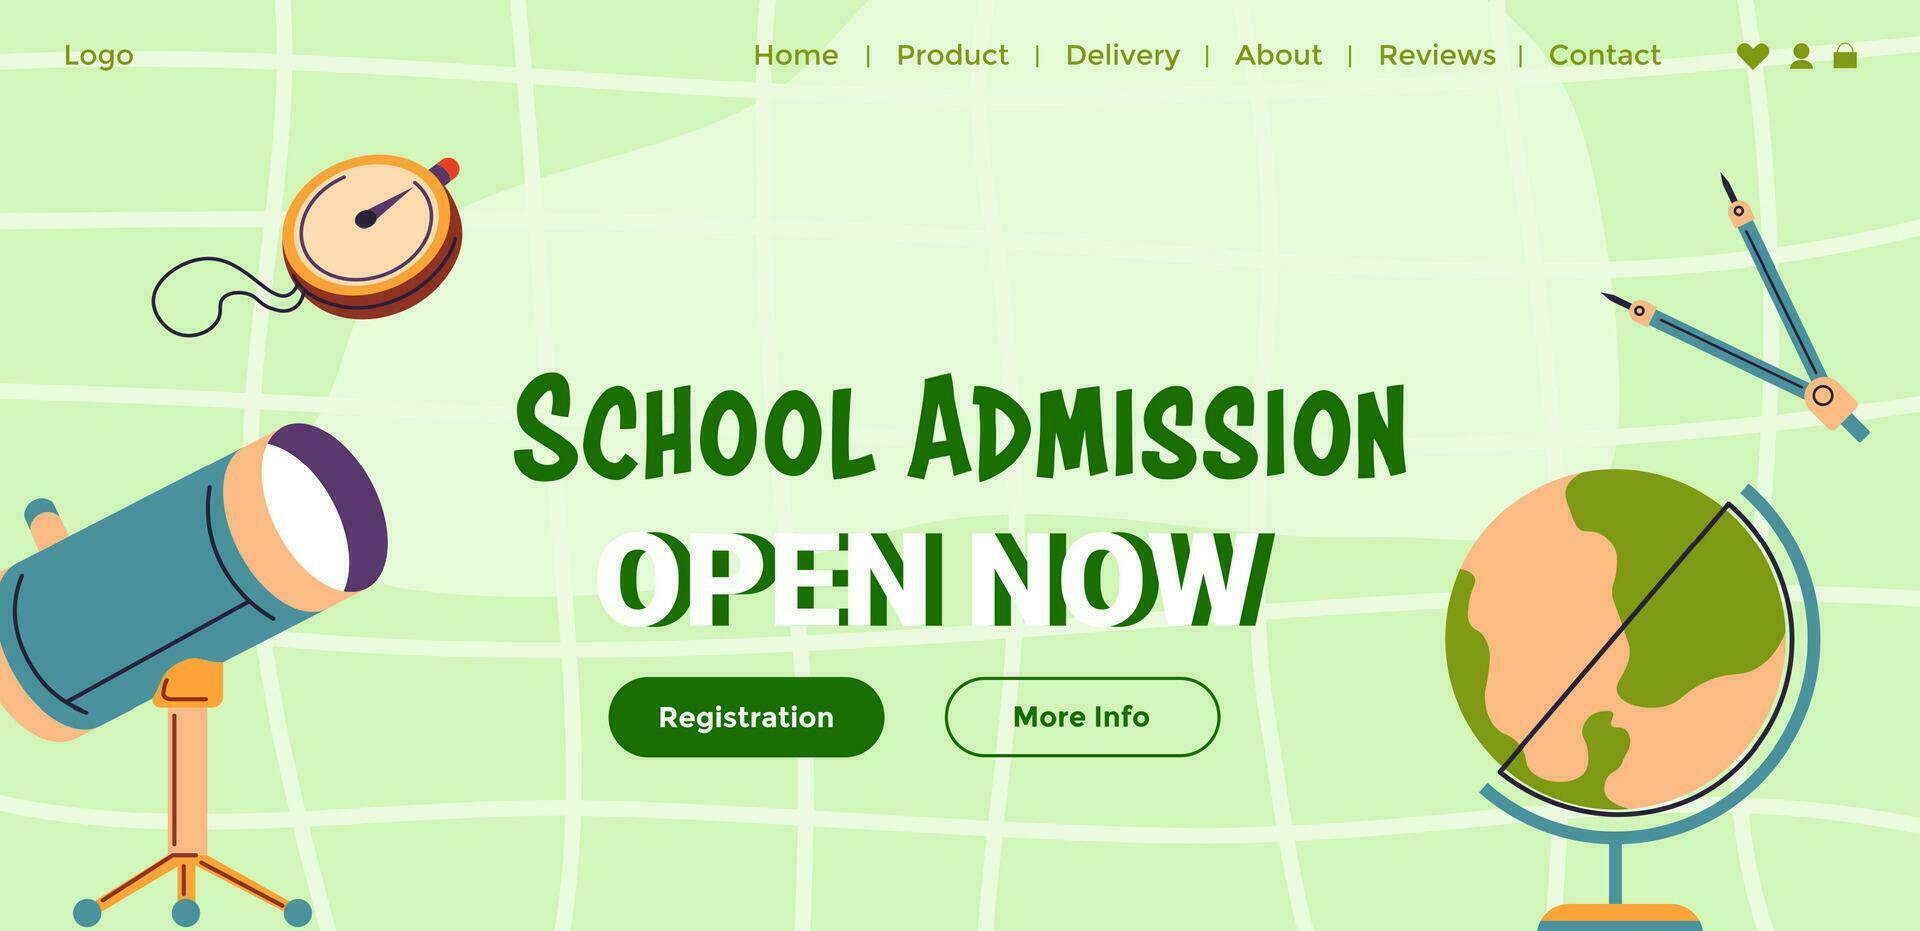 School admission, open for registration now web vector